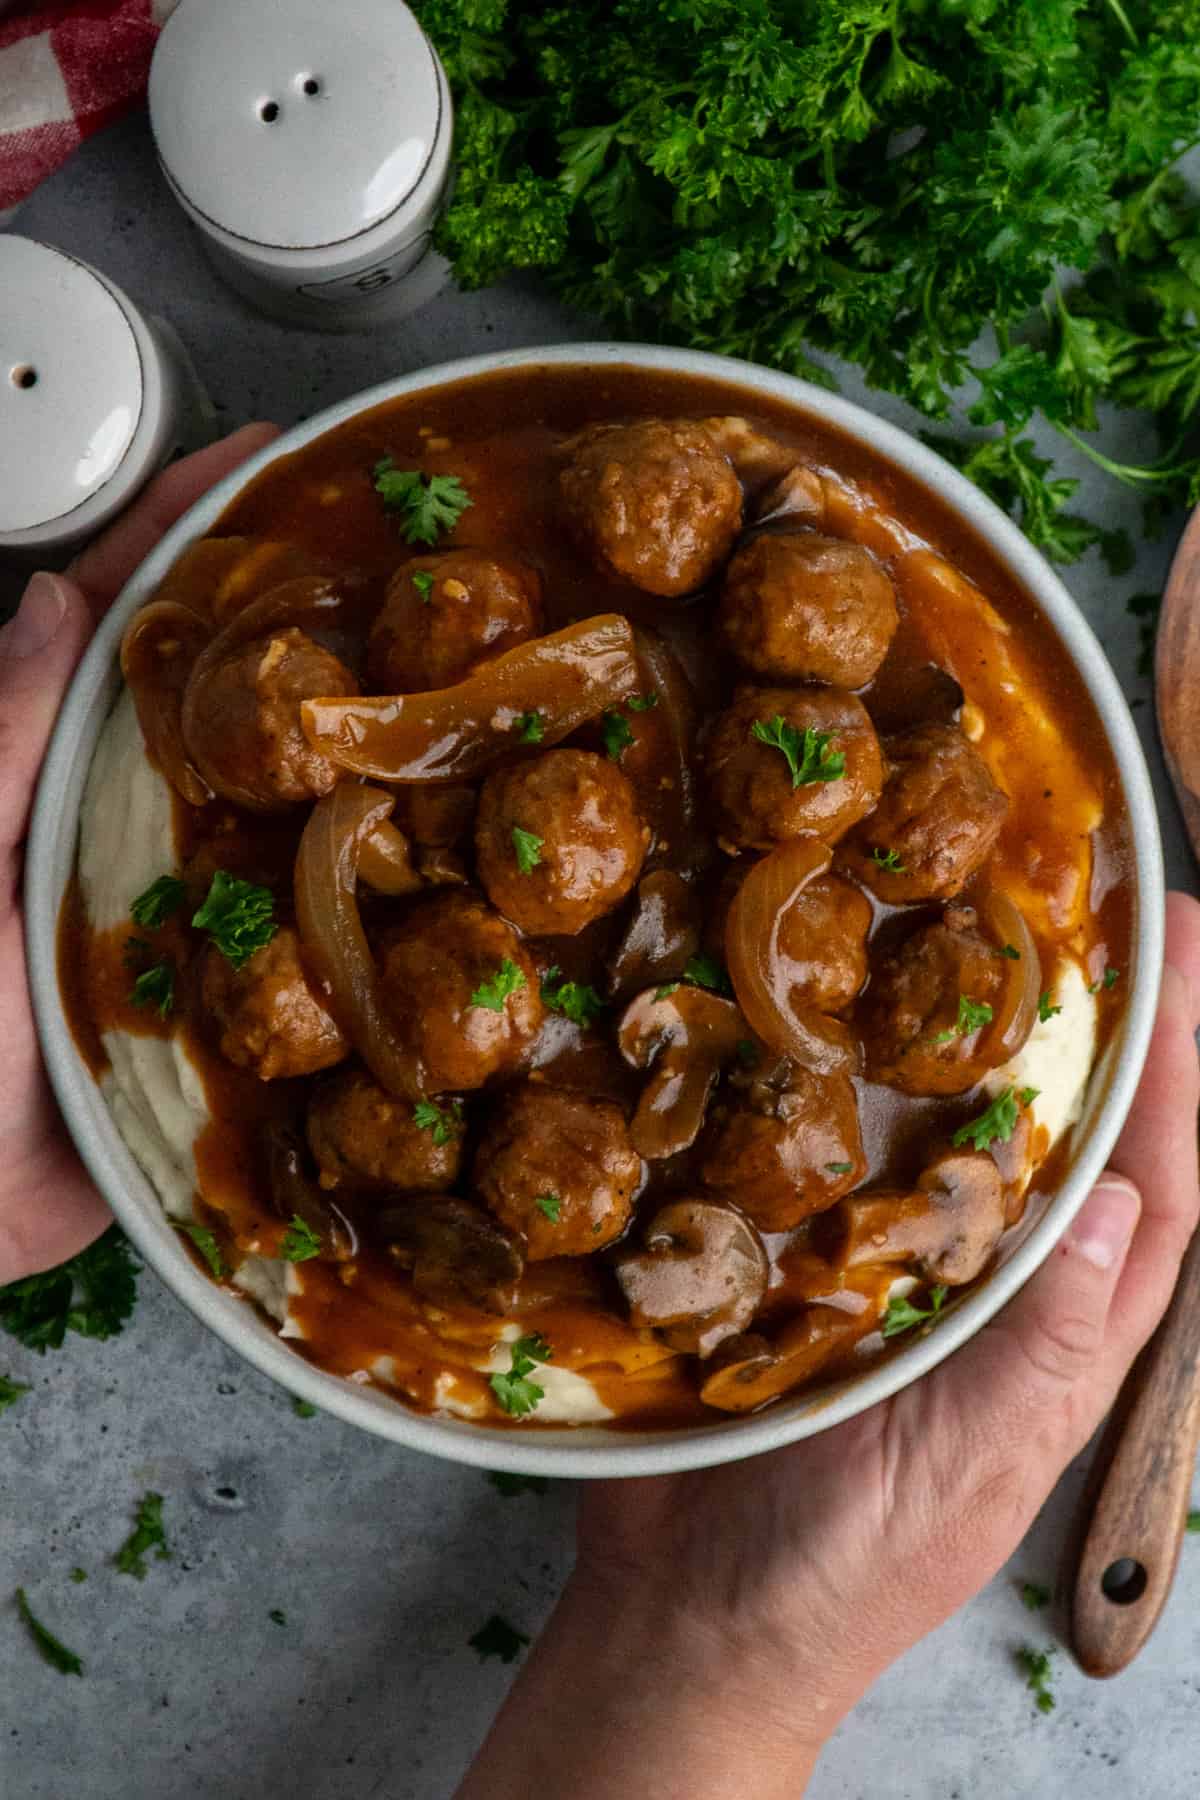 Hands holding a bowl of salisbury steak meatballs over mashed potatoes.